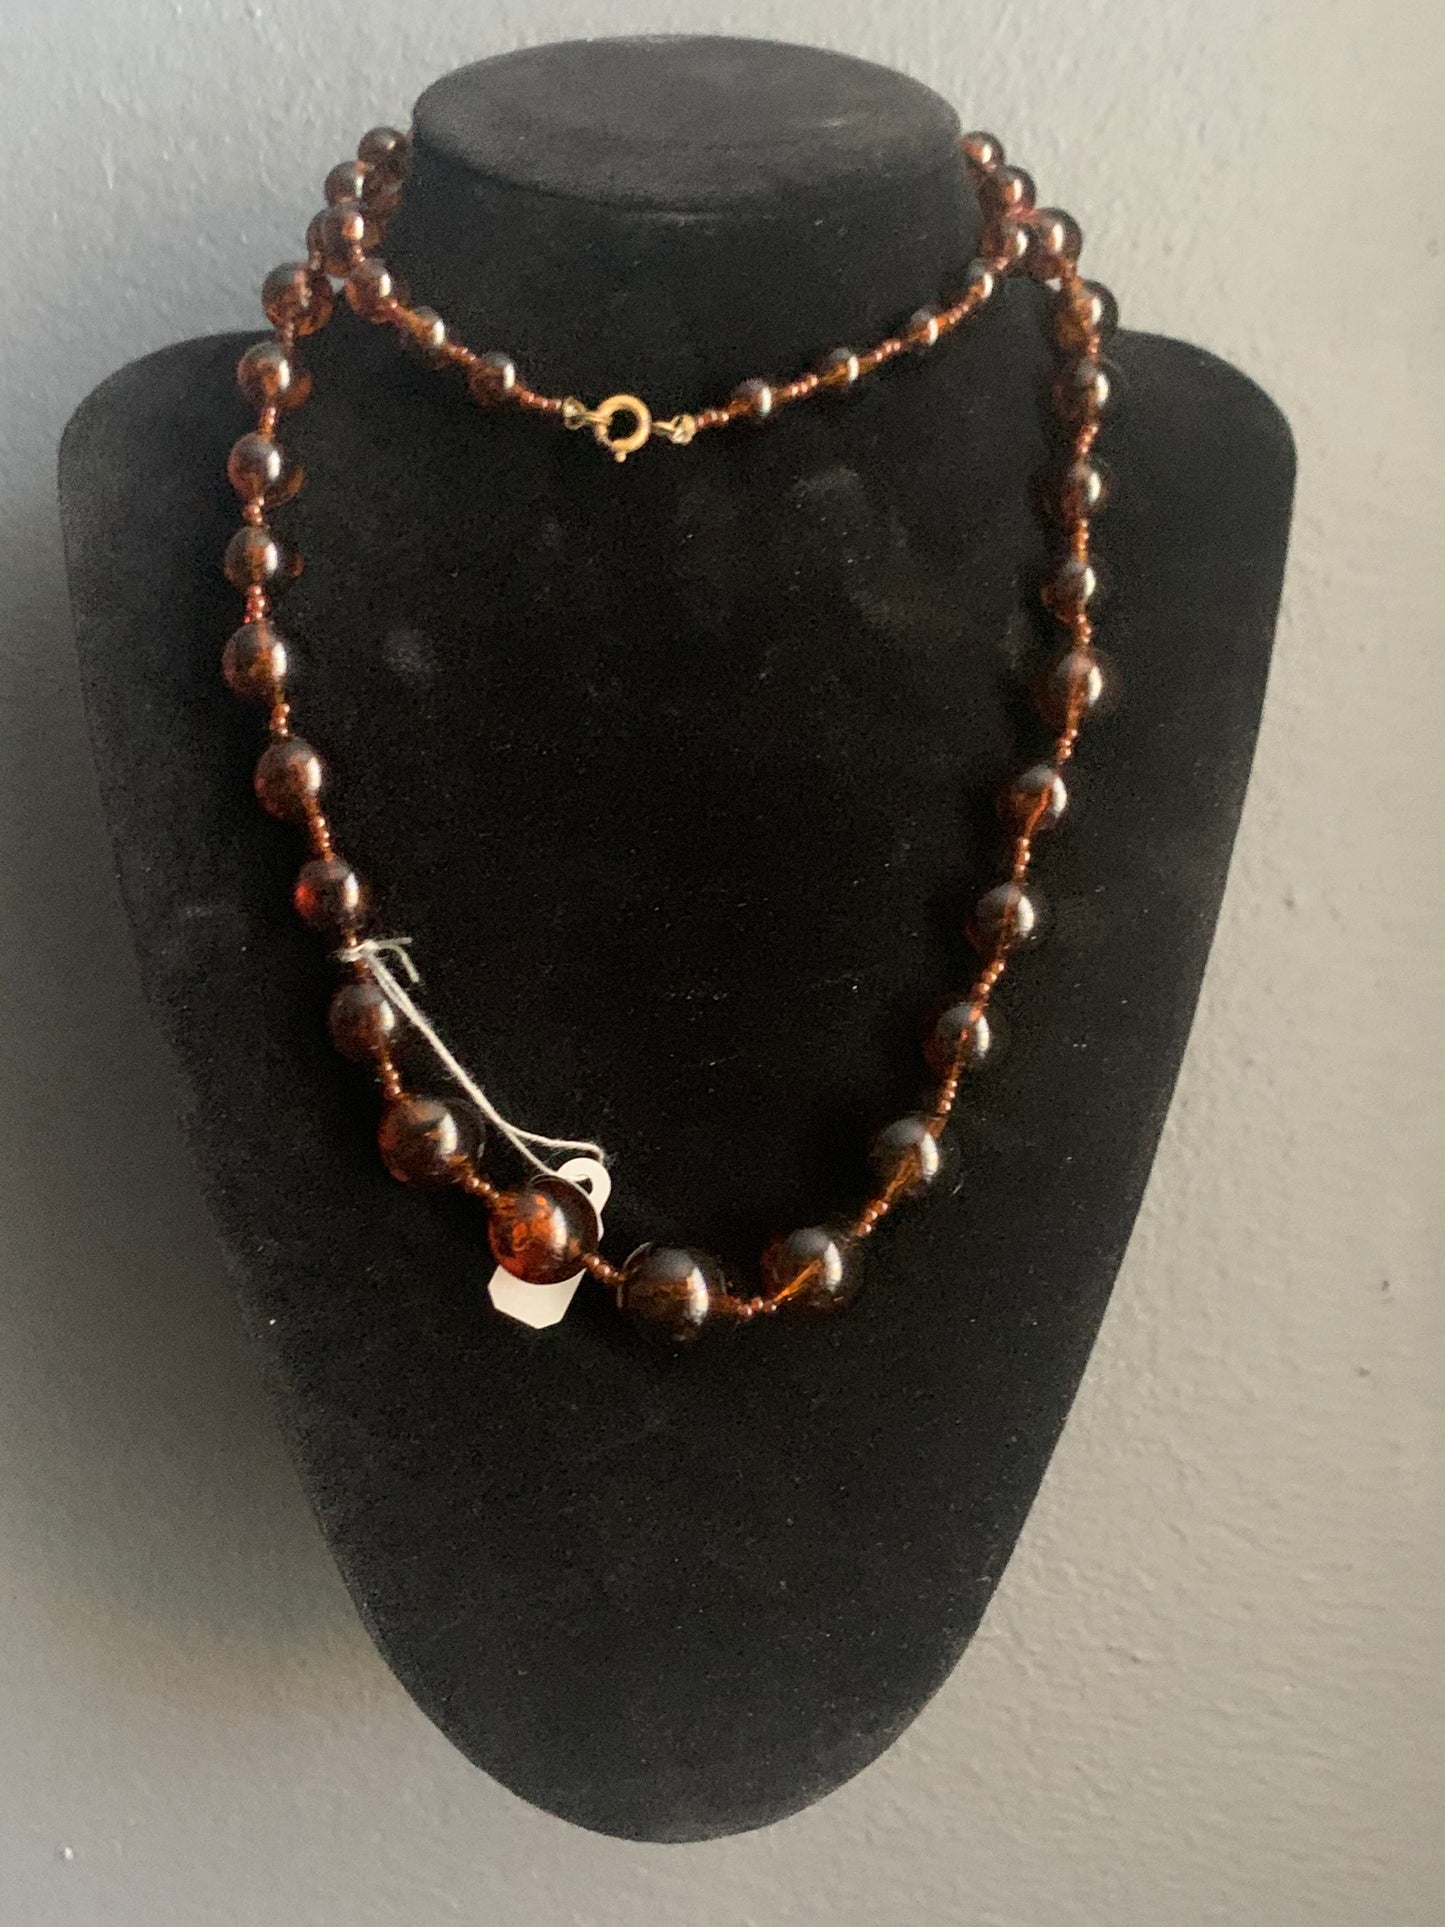 Amber bead becklace